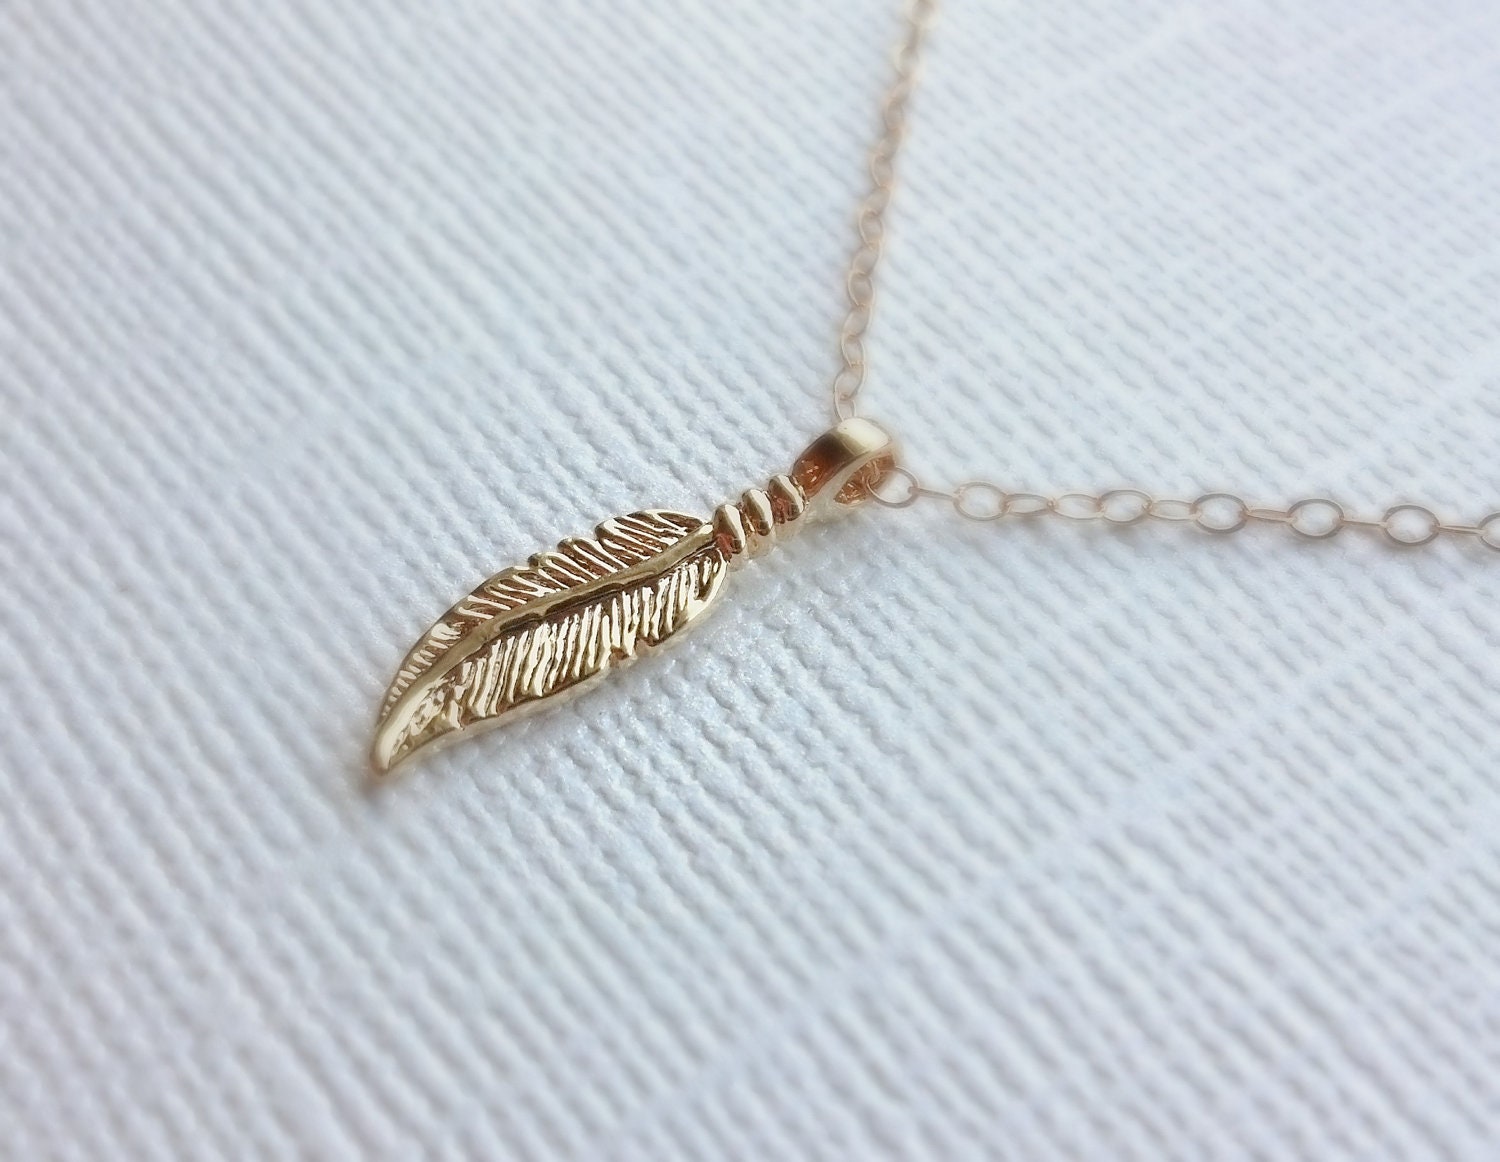 Gold Feather Charm Necklace Dainty 14k gold filled chain